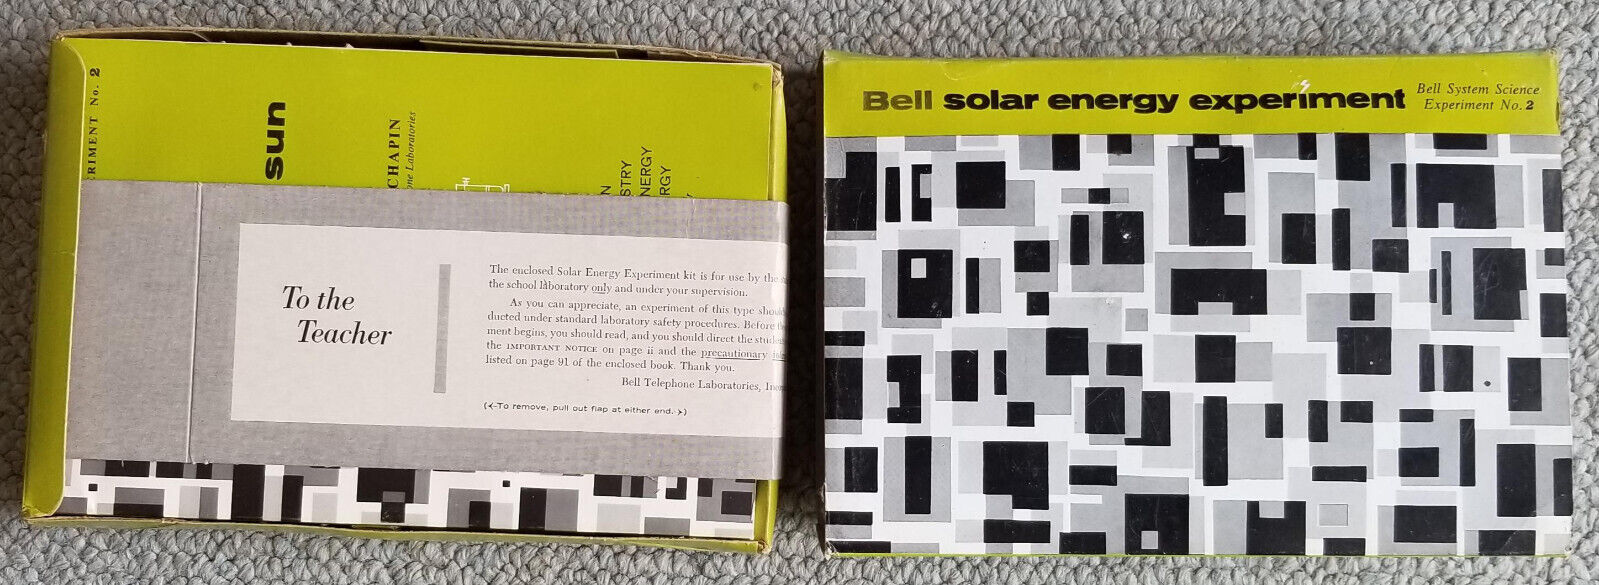 1962 Vintage Bell System Solar Energy Science Experiment No. 2 WITH TEACHER WRAP